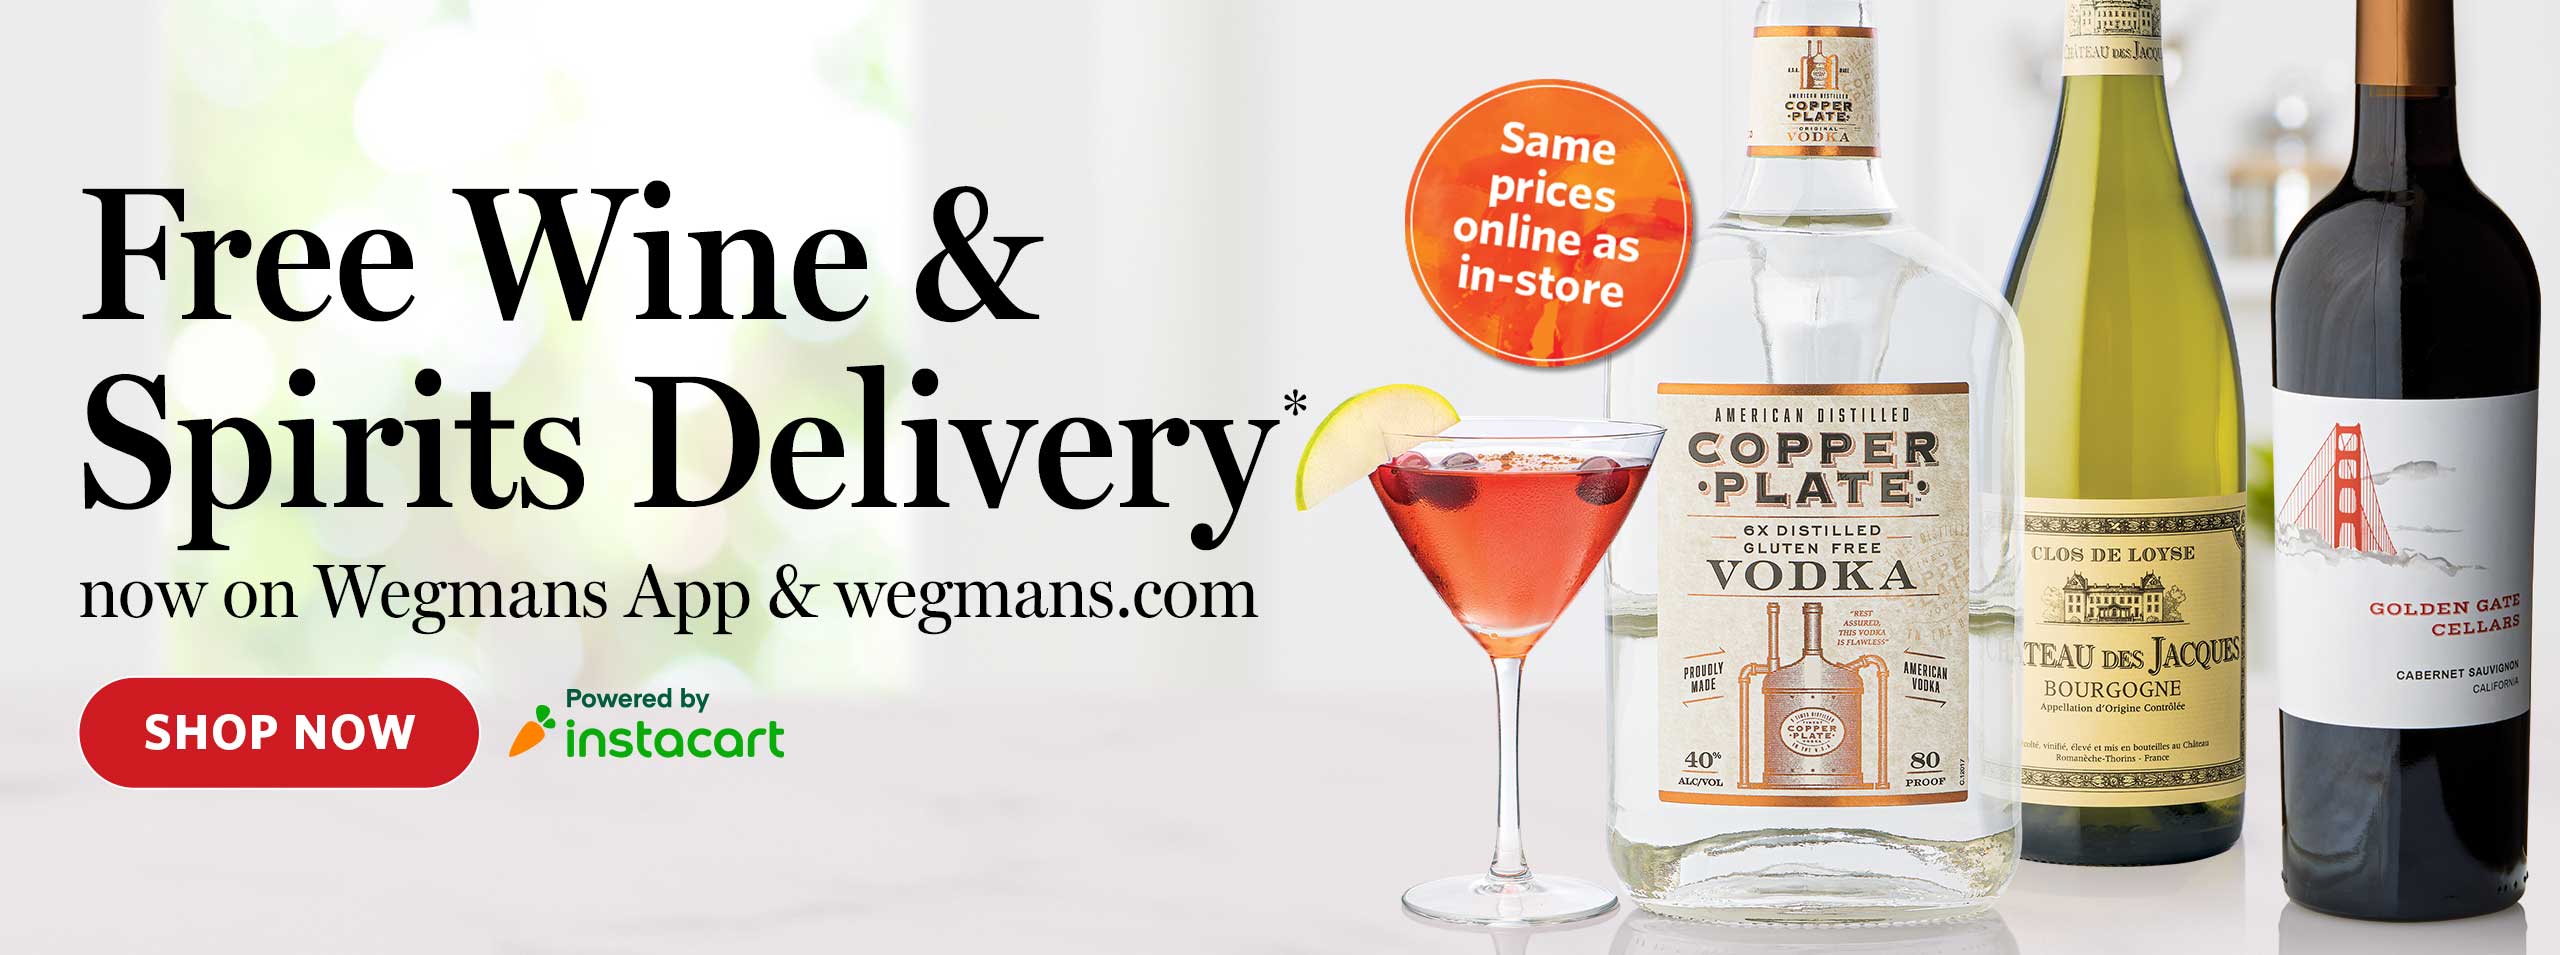 Free wine and spirits delivery no on the Wegmans App and wegmans.com - shop now